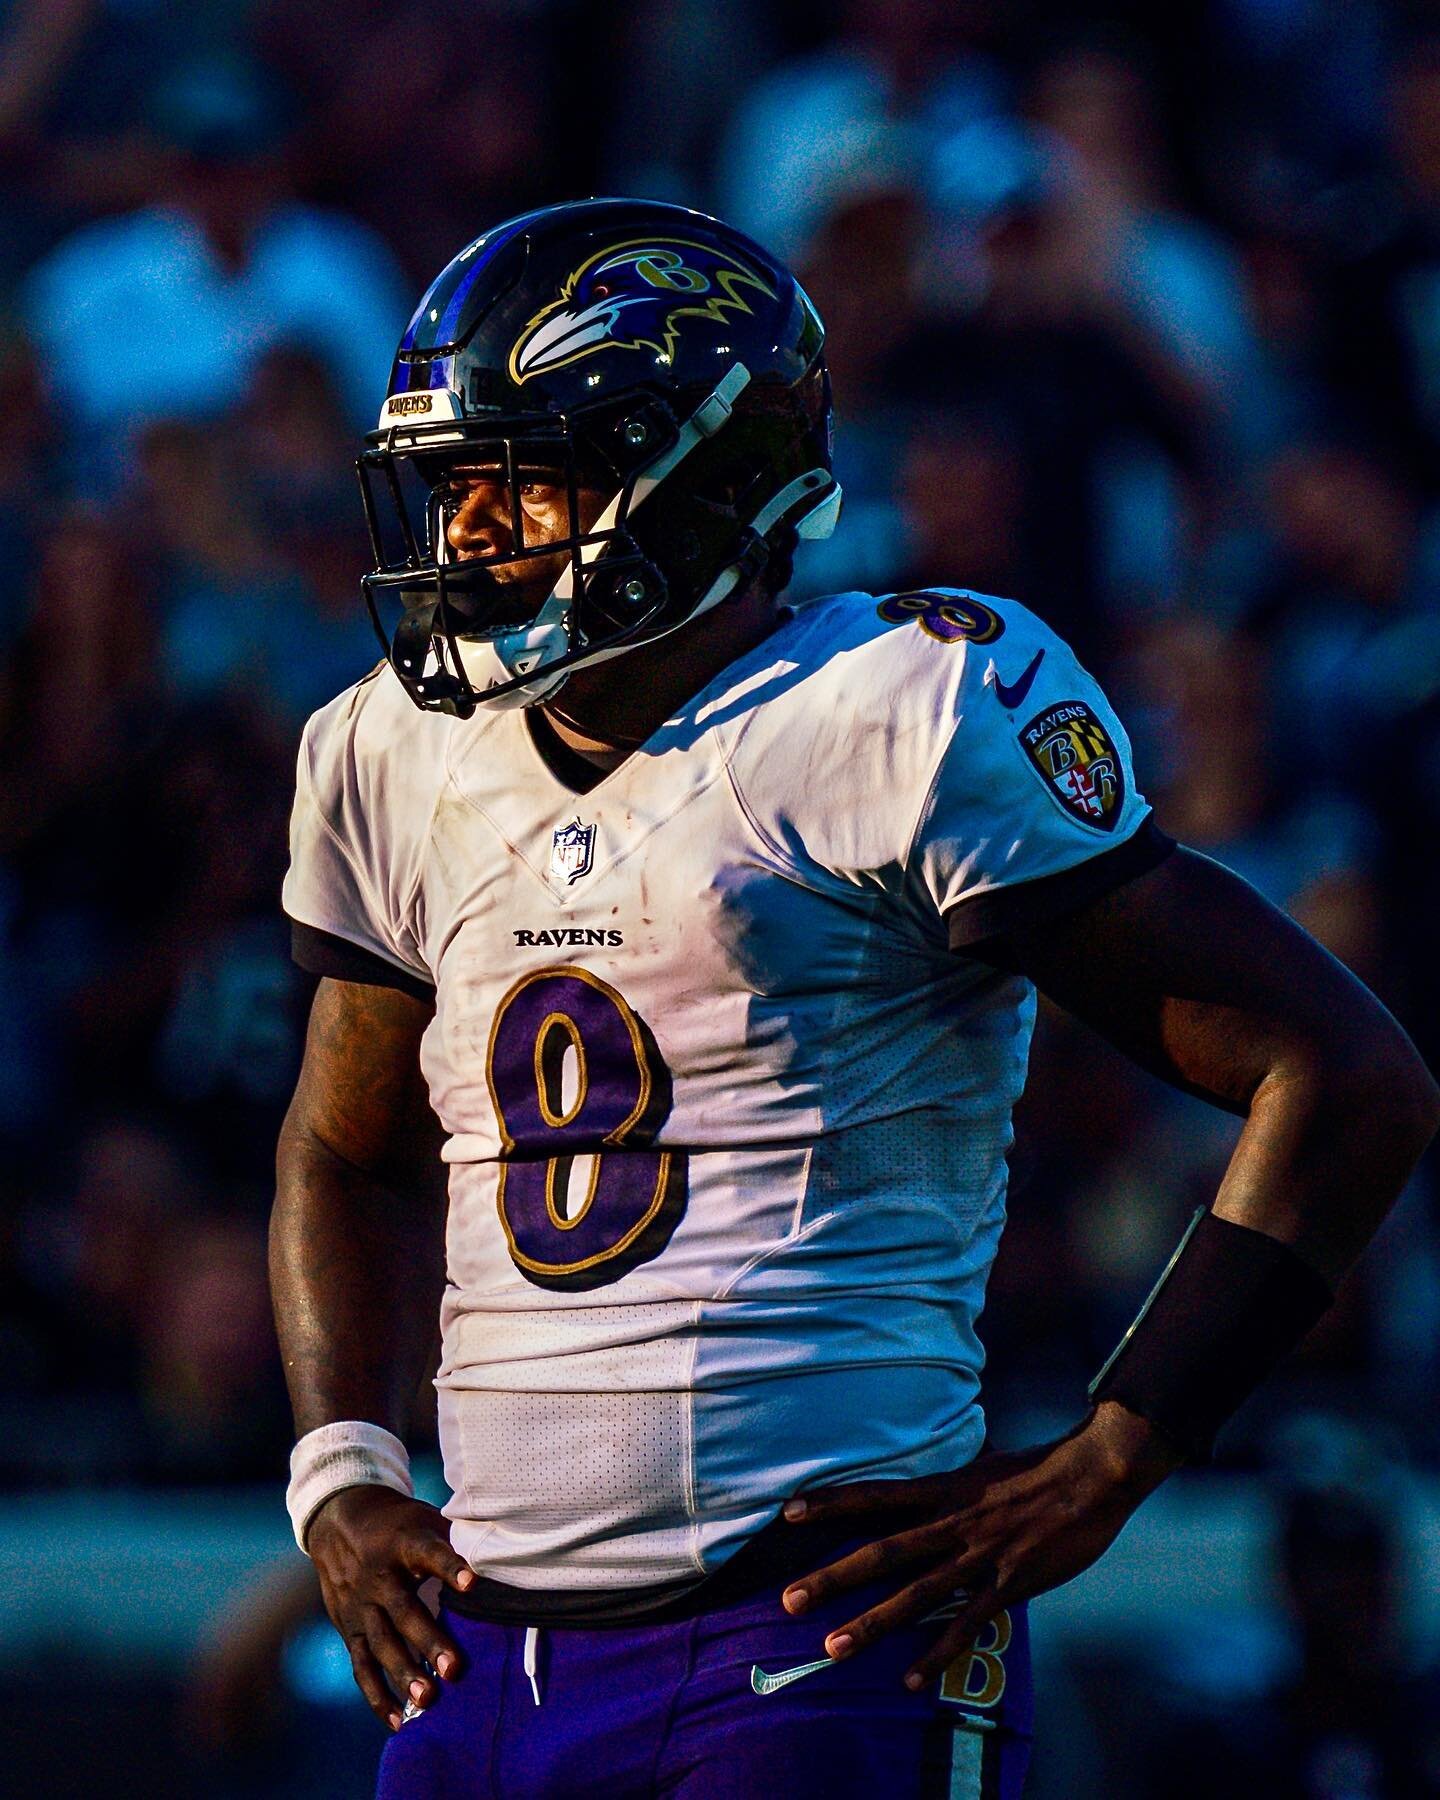 EXTENS&Icirc;&Oslash;N // Guess I should finally post these shots of Lamar Jackson (from last season&rsquo;s L here in #DUUUVAL 🙃) now that&rsquo;s he&rsquo;s staying in Ravens threads 🧵🤷🏻&zwj;♂️📸

#TheWayfarersDream #LamarJackson Victory #Jagua